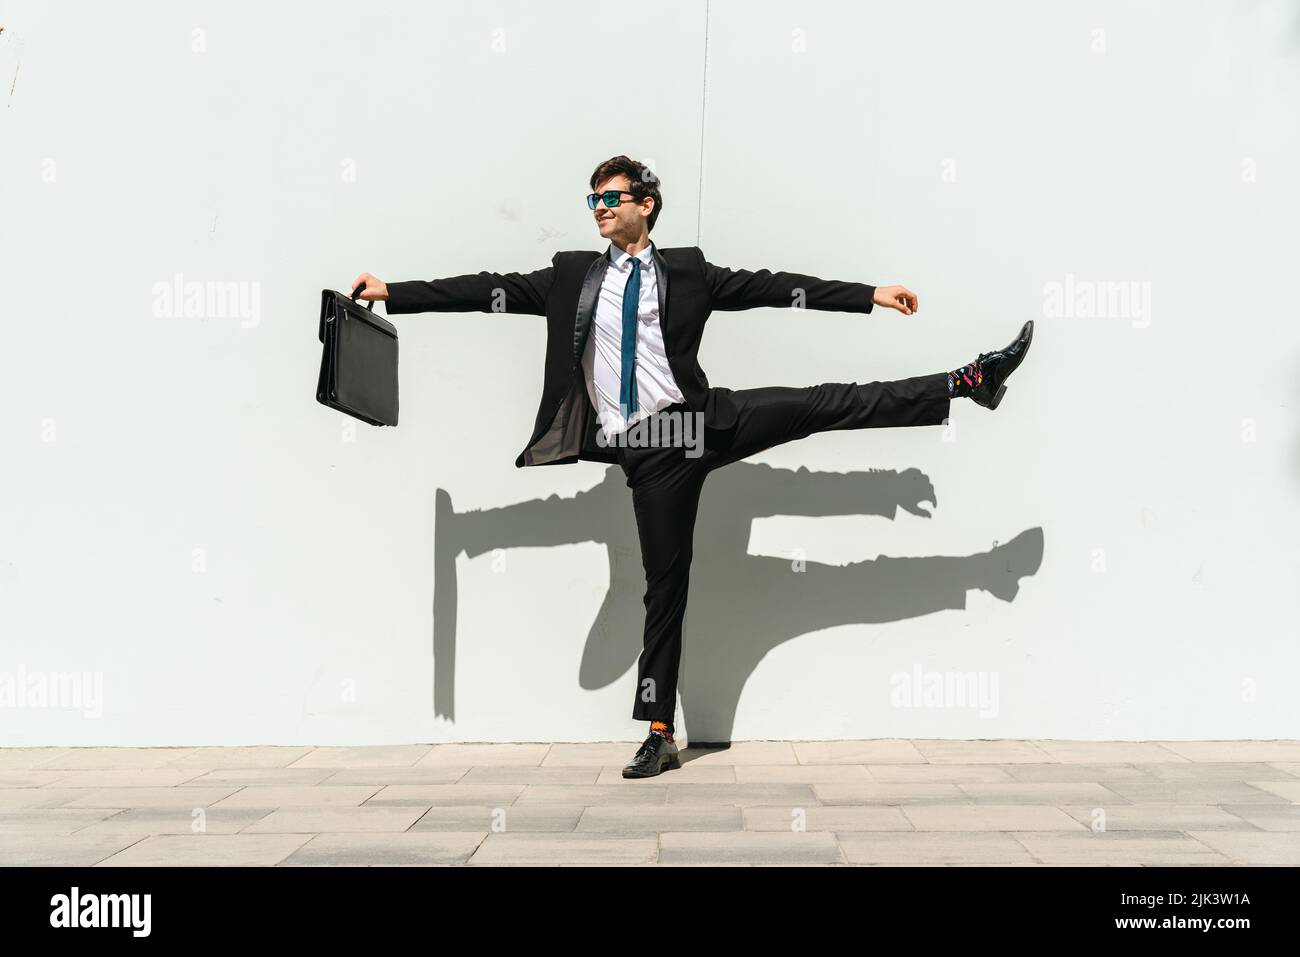 Happy and handsome adult businessman wearing elegant suit doing acrobatic trick moves in the city, alternative concept for business advertisement with Stock Photo